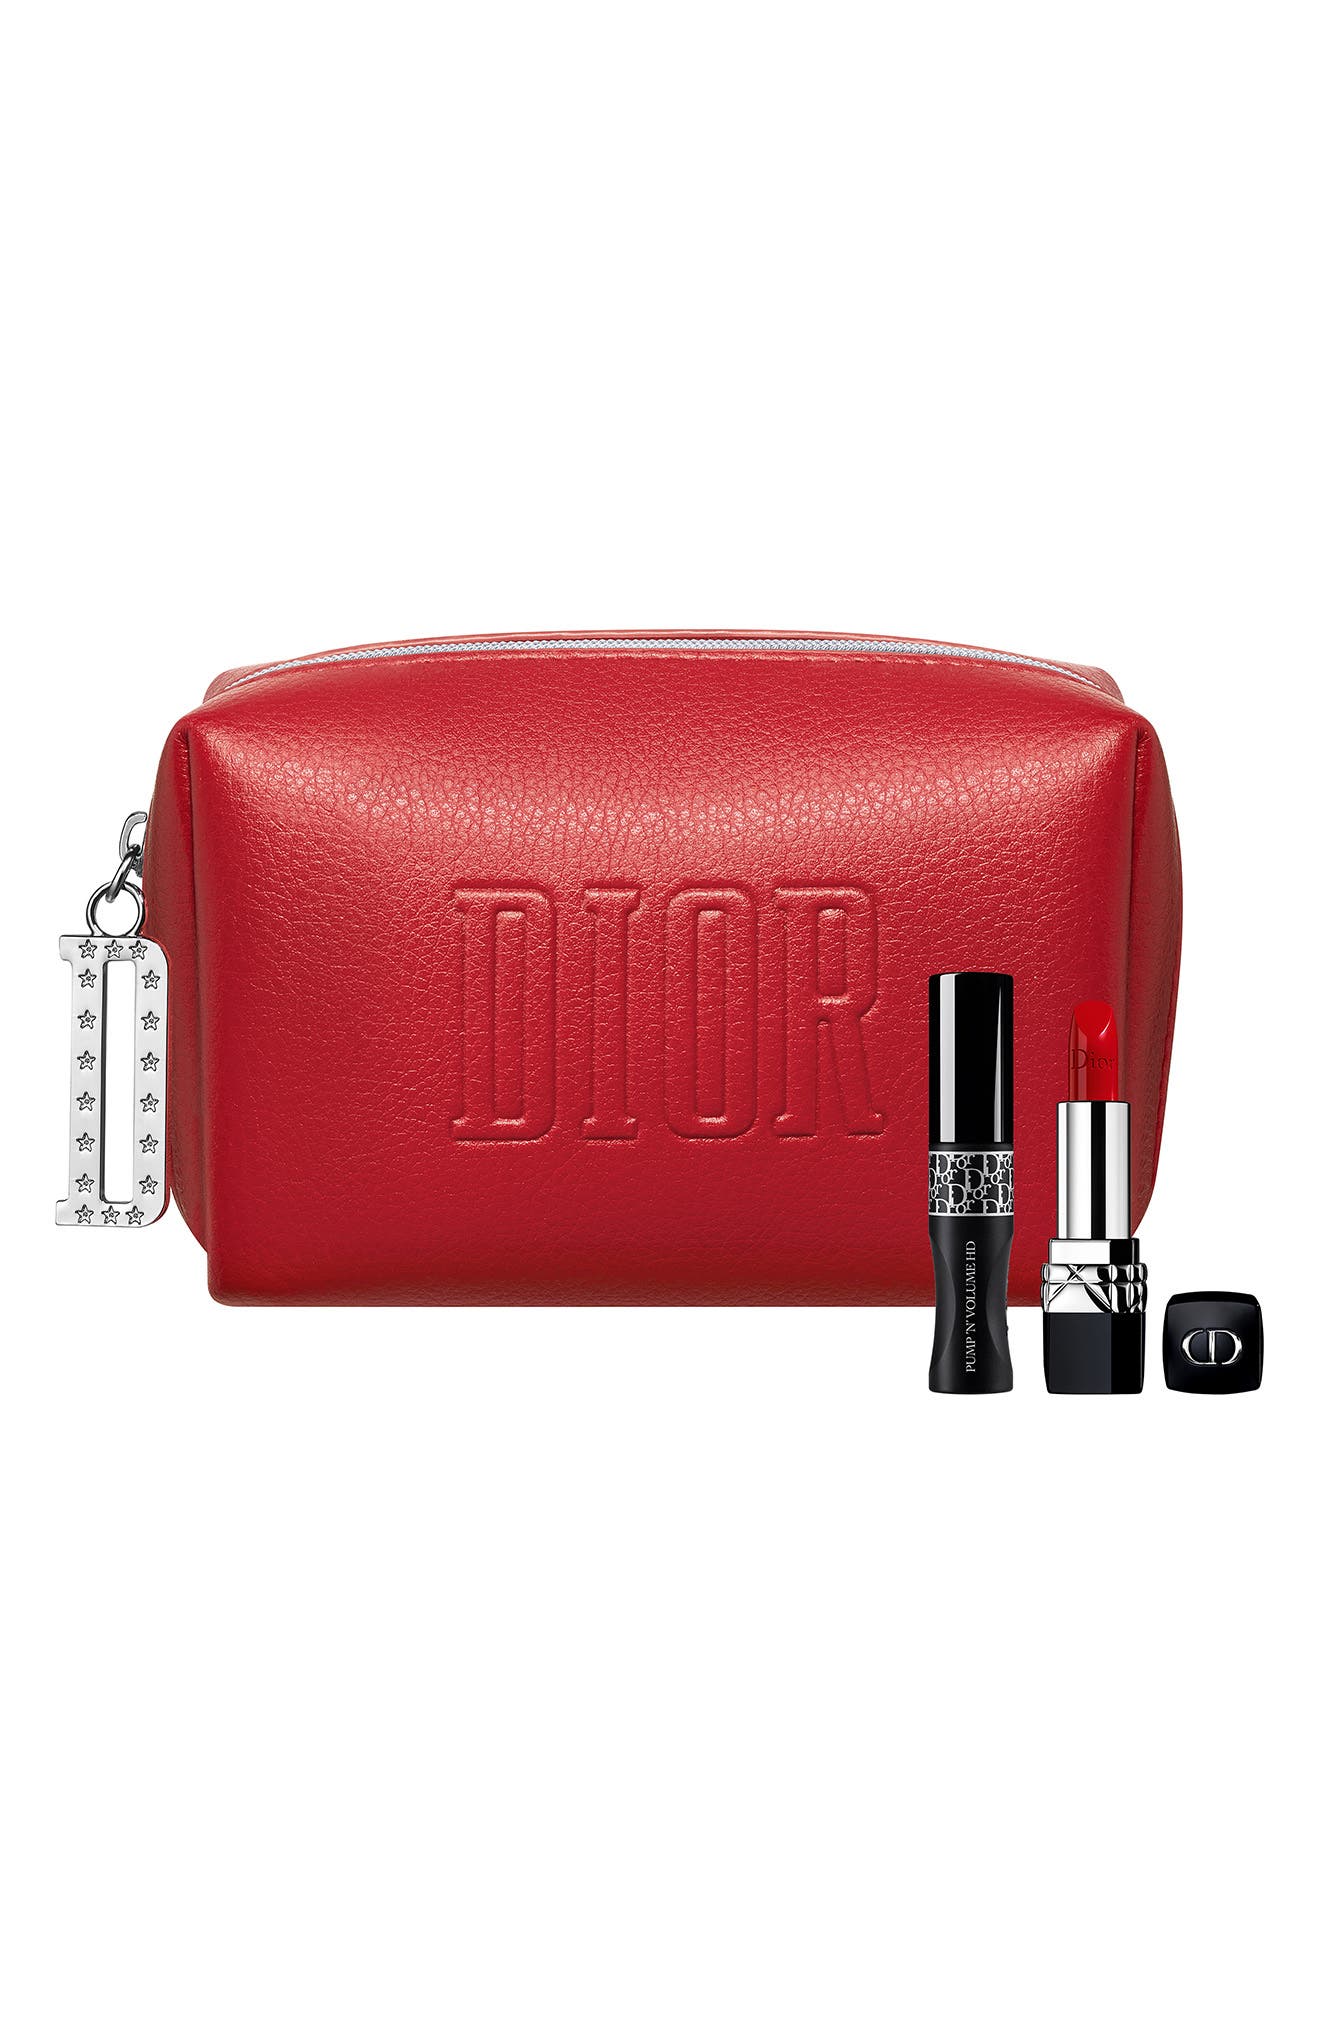 dior gift with purchase 2018